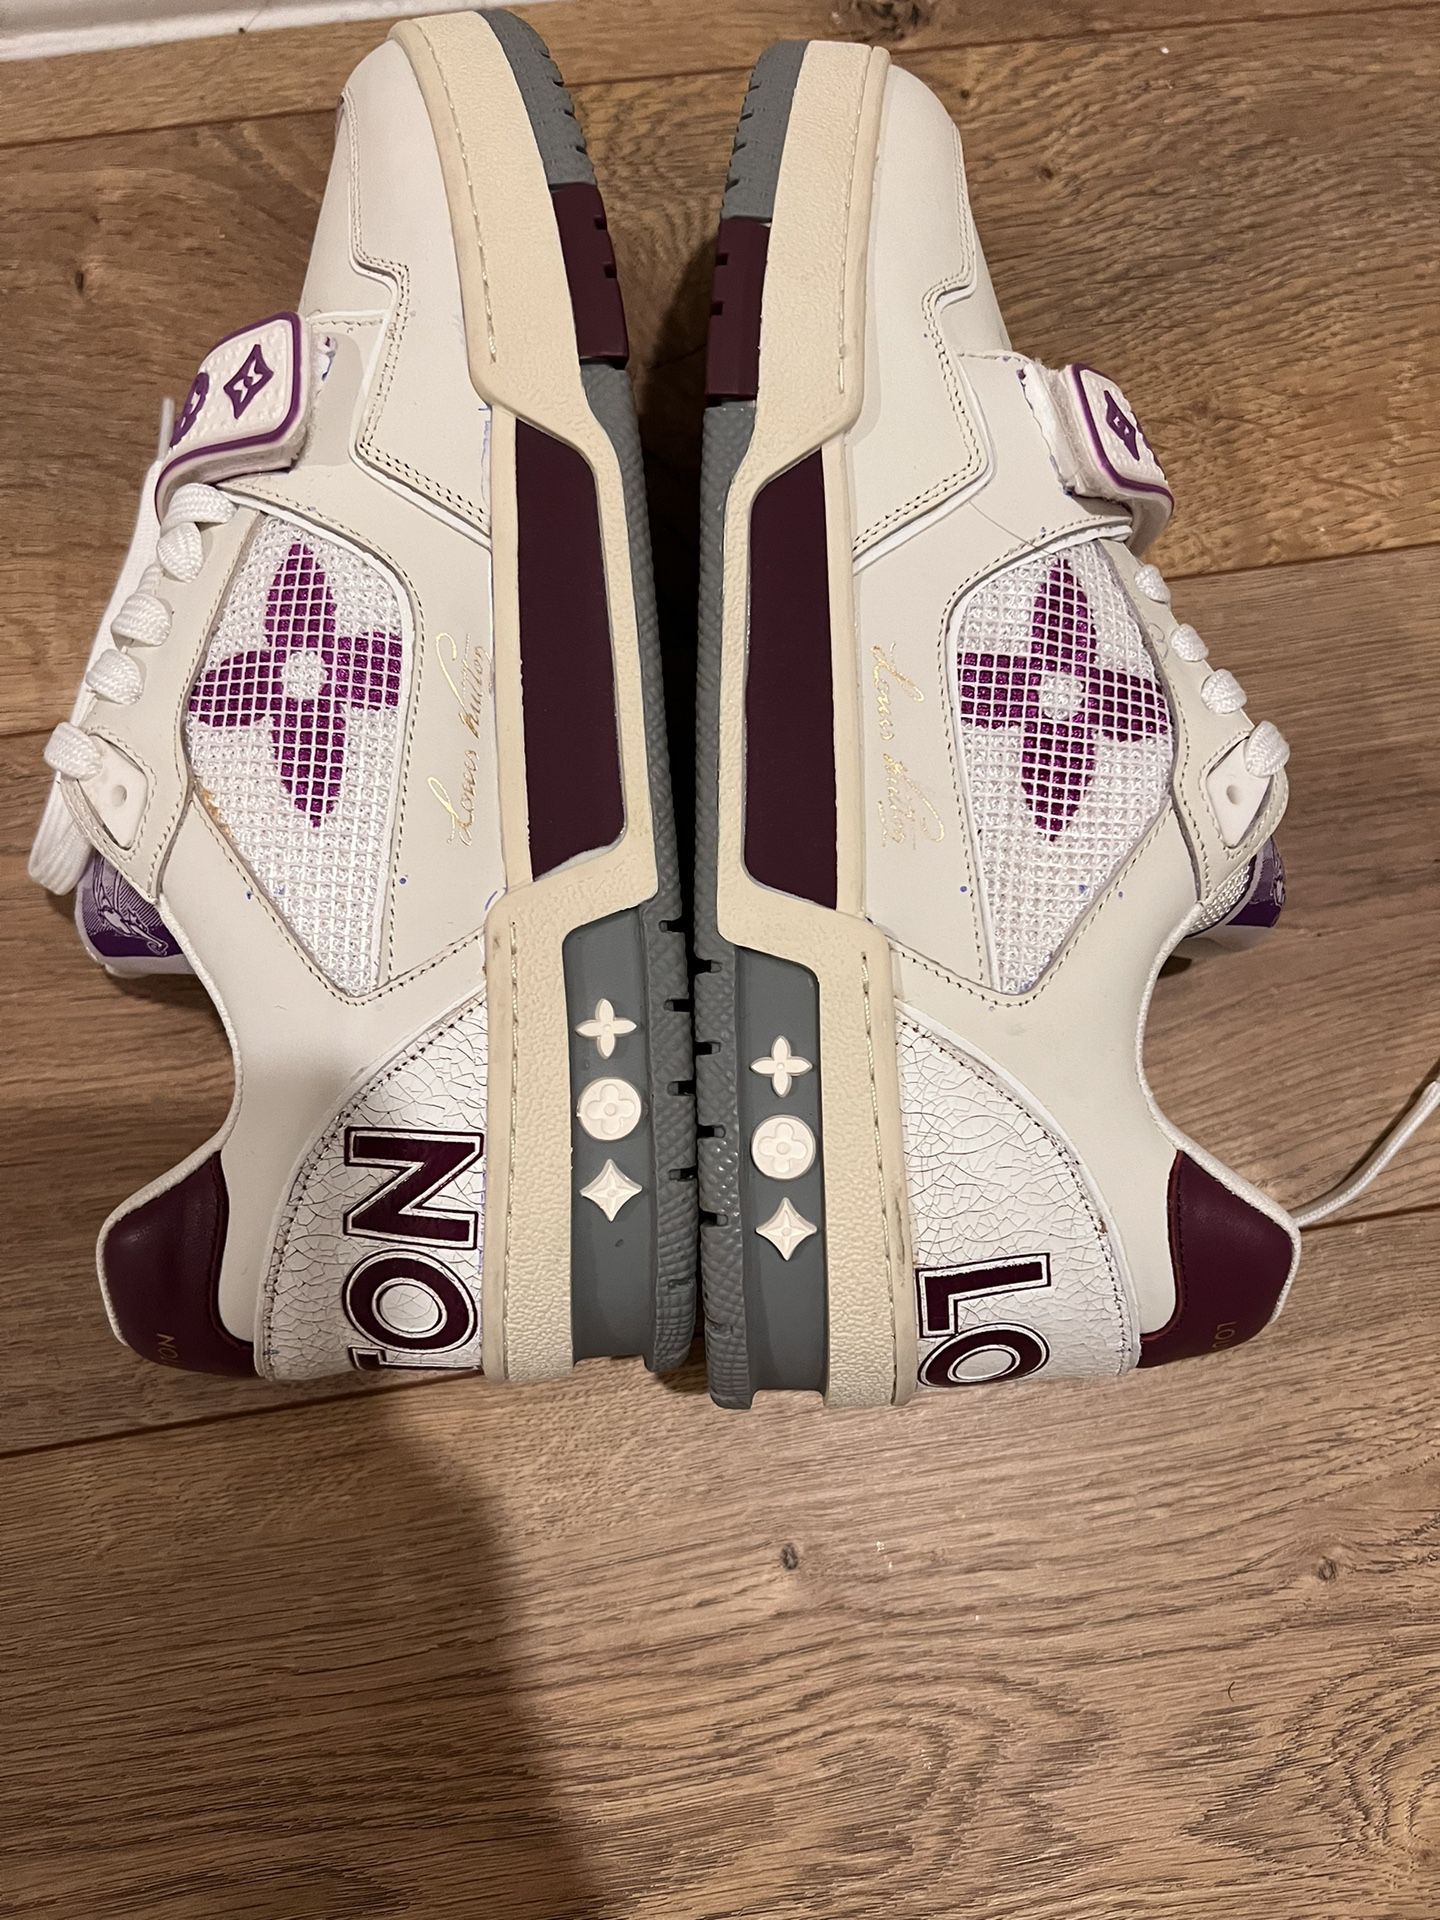 Louis Vuitton Trainer 2 Sneaker for Sale in Bowie, MD - OfferUp